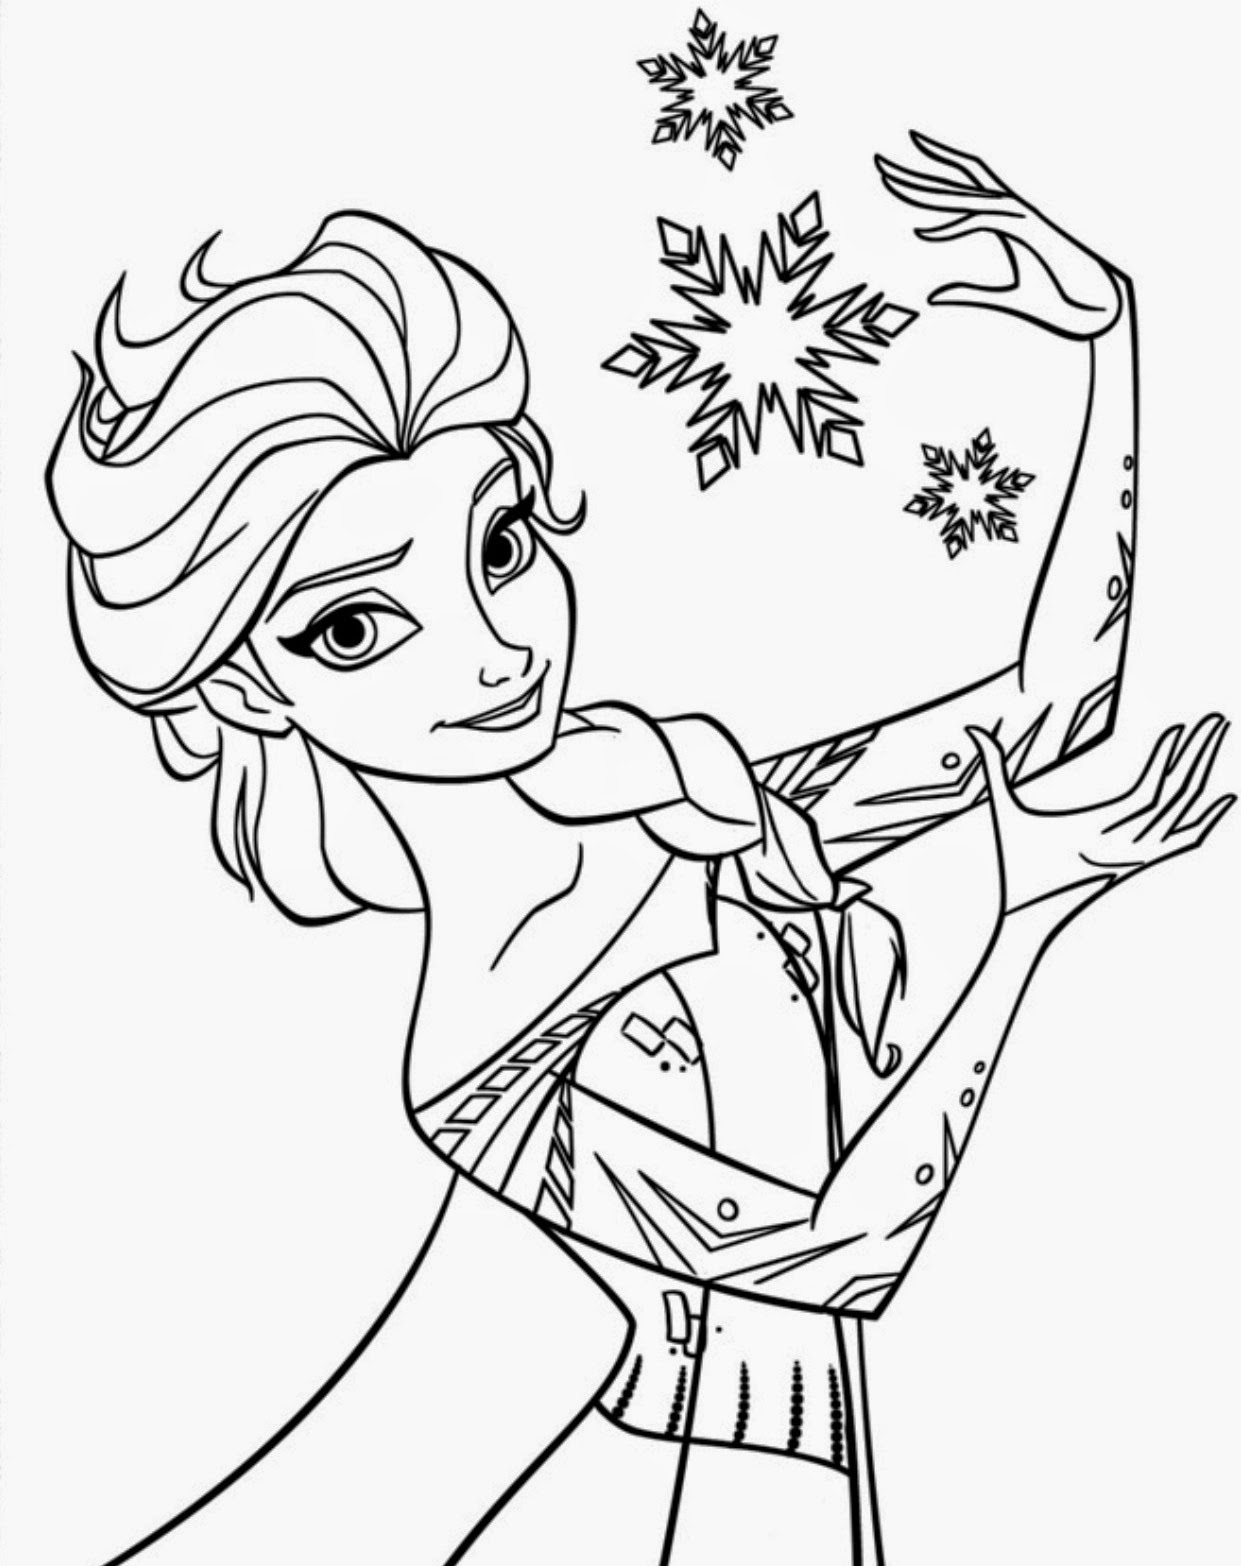 15 Beautiful Disney Frozen Coloring Pages Free Instant Knowledge